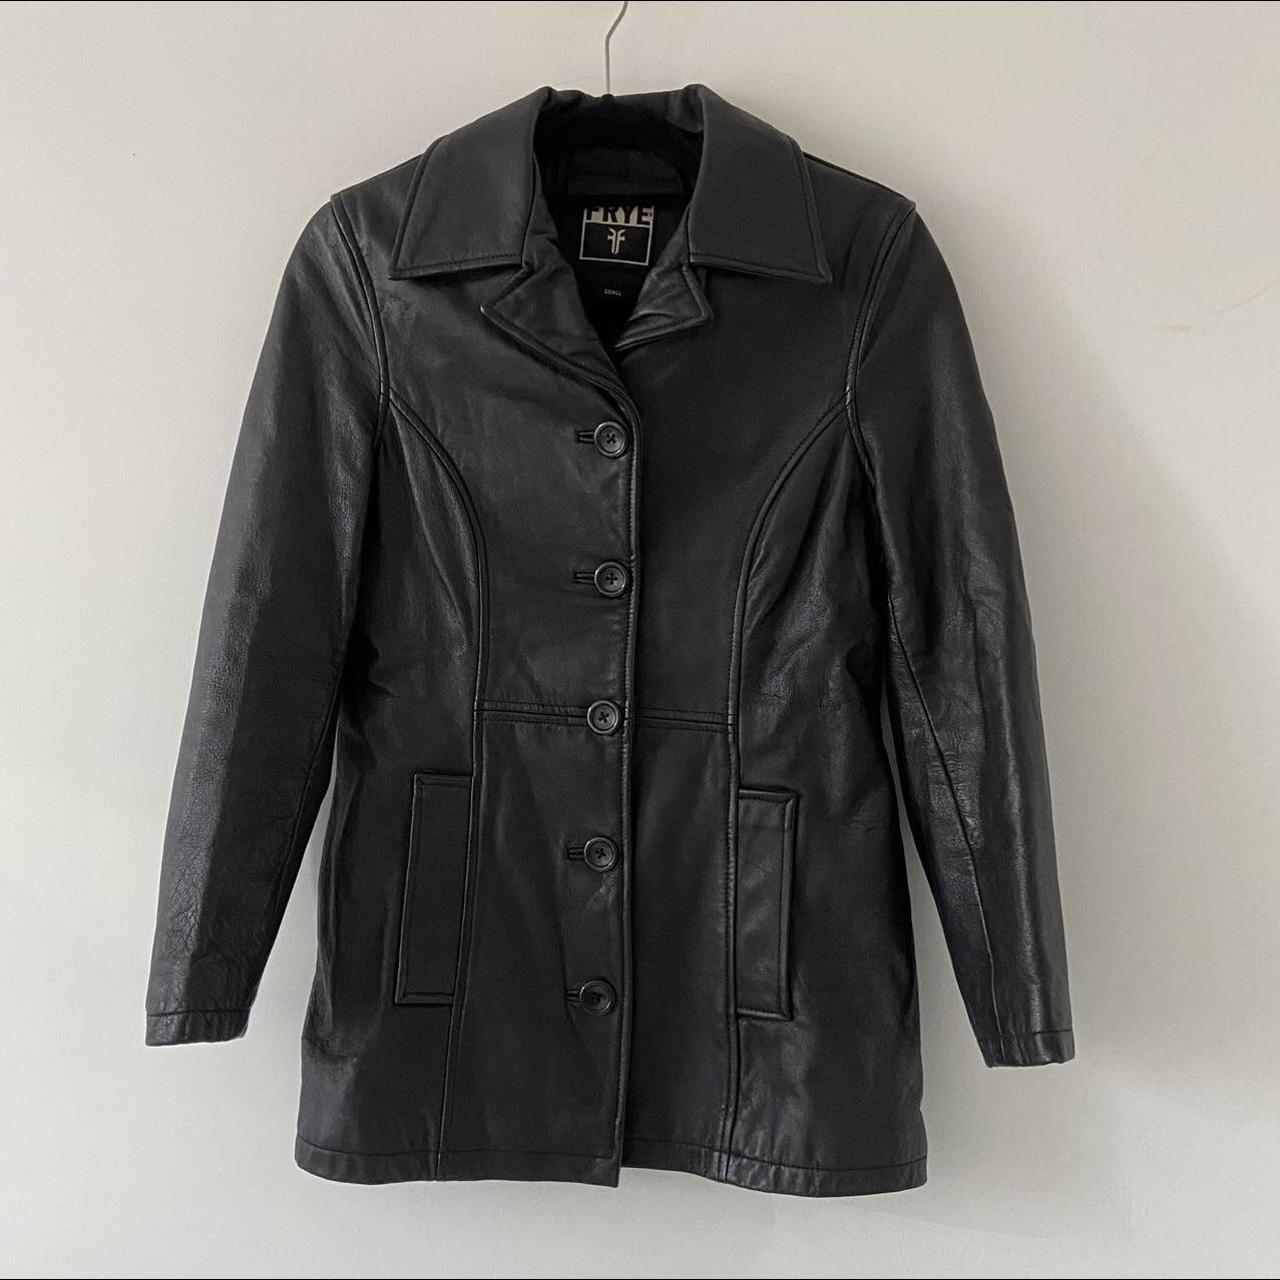 Frye Women’s Leather Jacket Size Small Condition:... - Depop